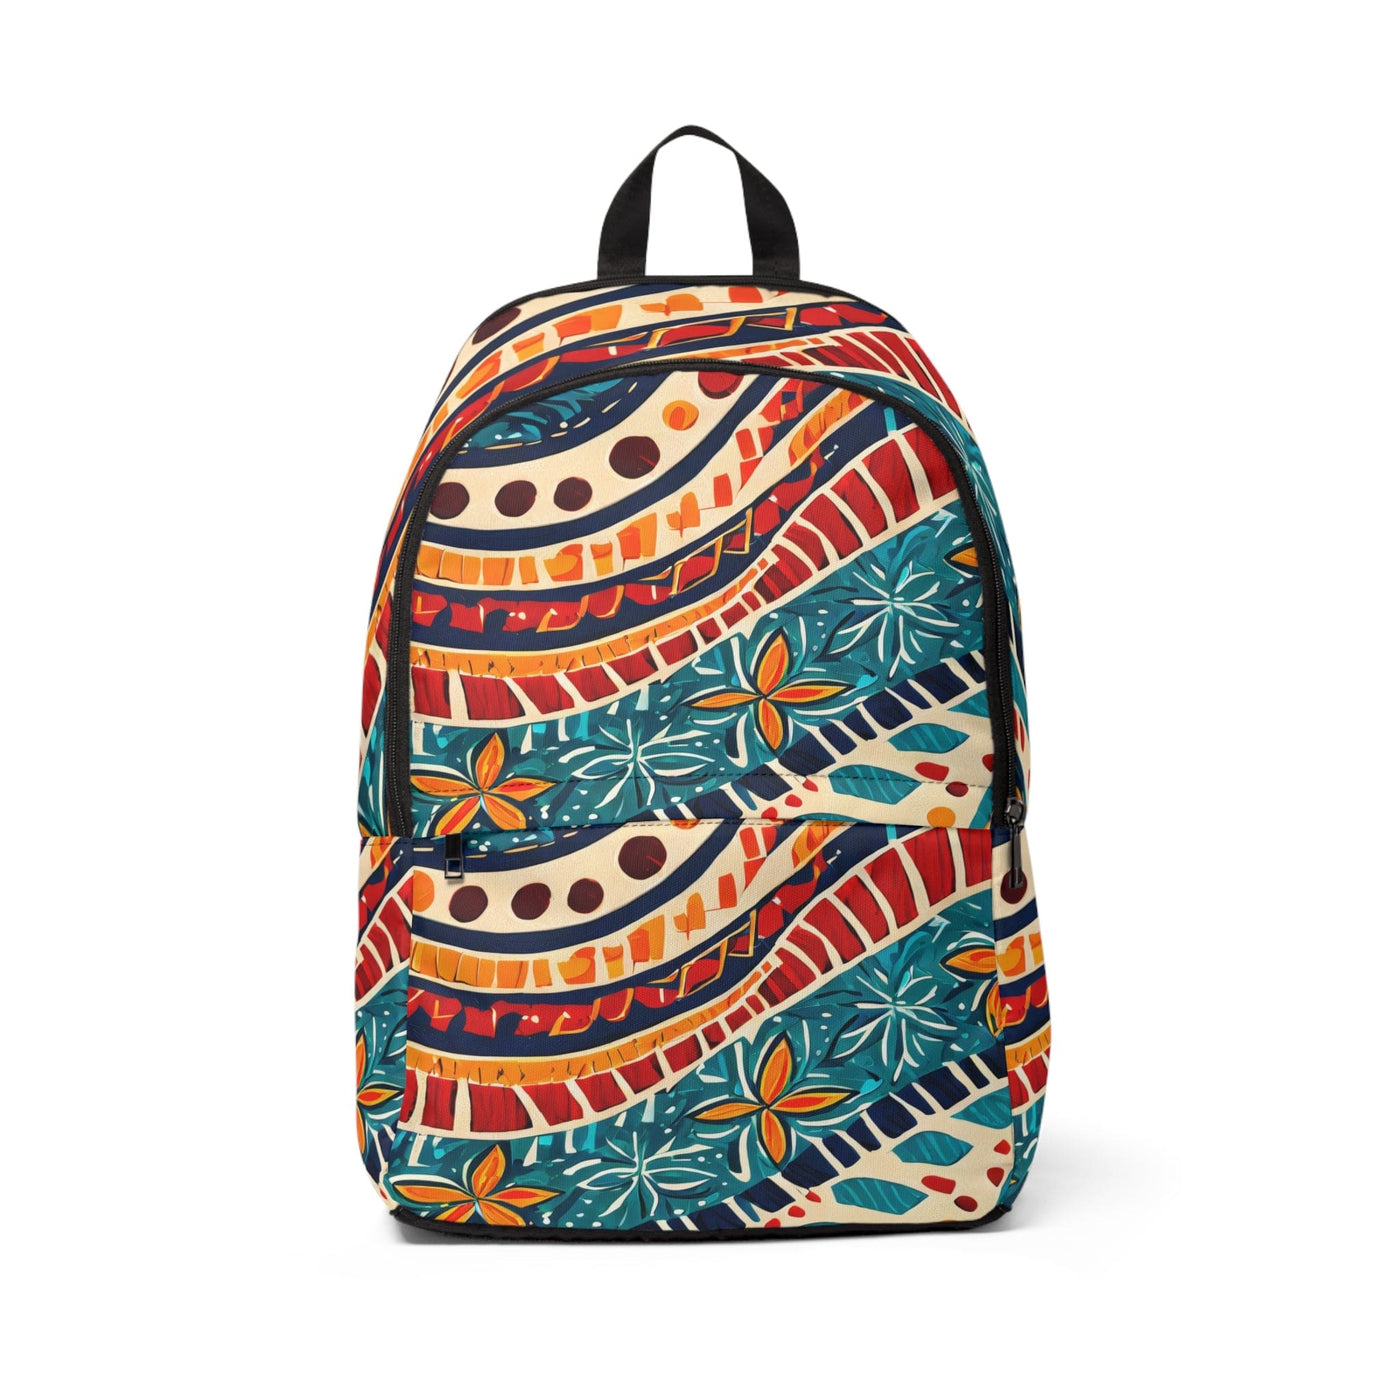 Fashion Backpack Waterproof Abstract Vibrant Multicolor Pattern 61374 - Bags